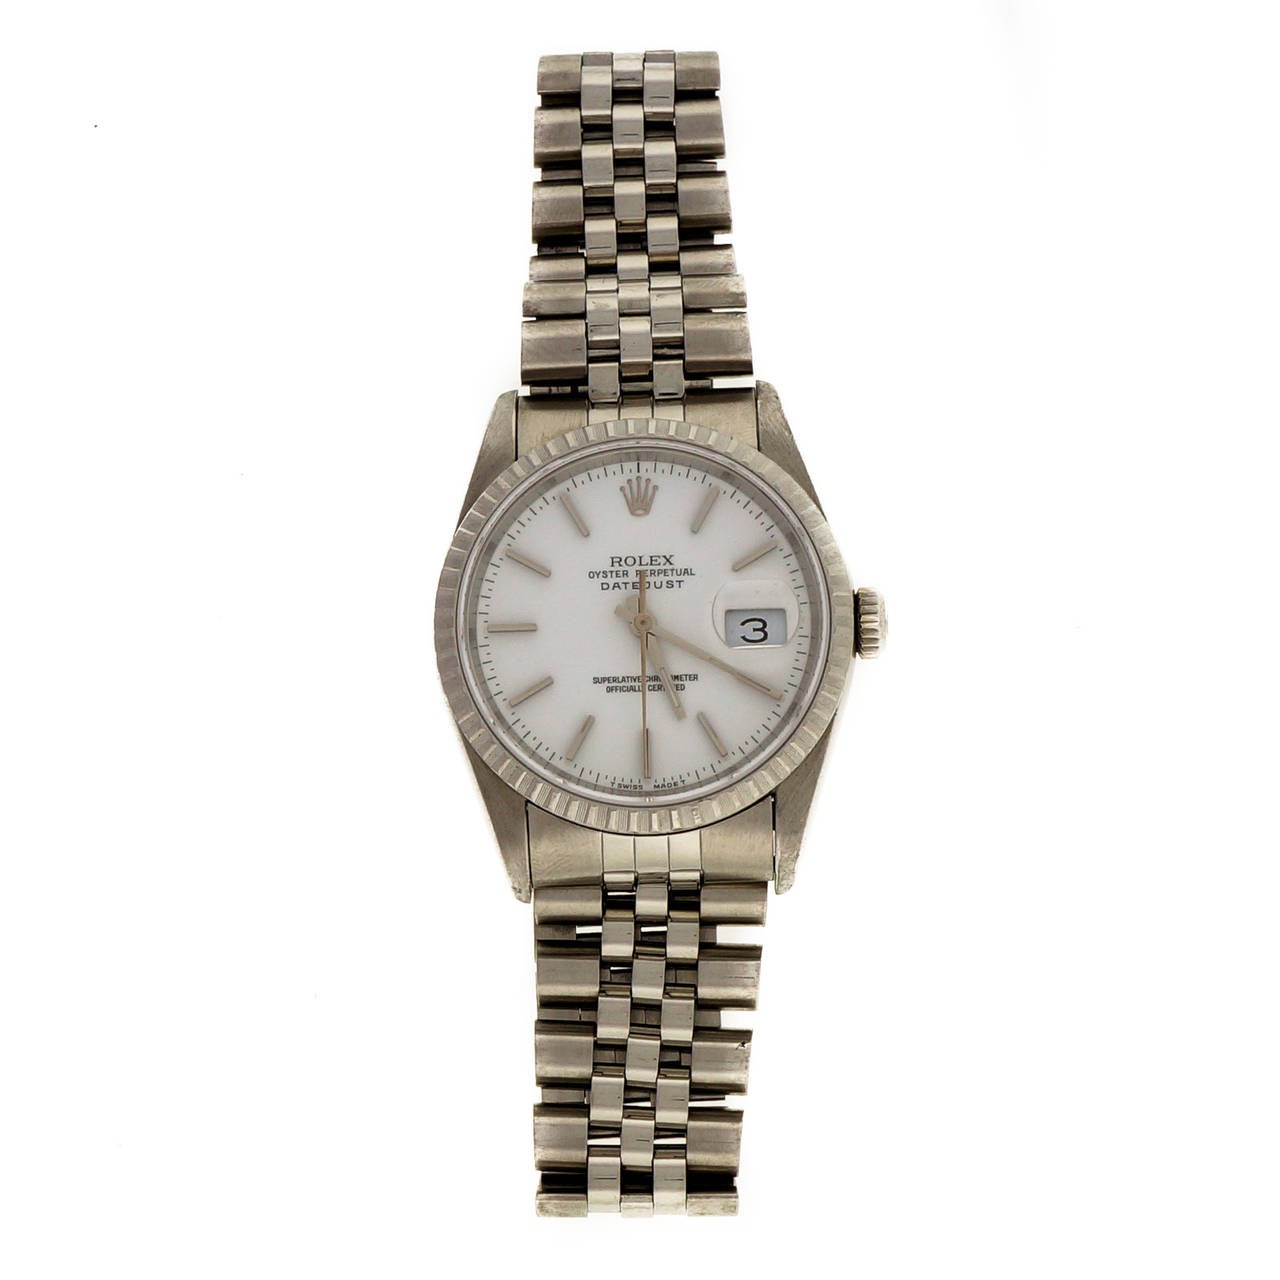 Rolex stainless steel Datejust wristwatch with 18k white gold bezel and bright white dial with simple baton indexes, Ref. 16220, circa 1992.

Steel steel and 18k white gold
Length: 44mm
Width: 36mm
Case thickness: 11.53mm
Bracelet width at